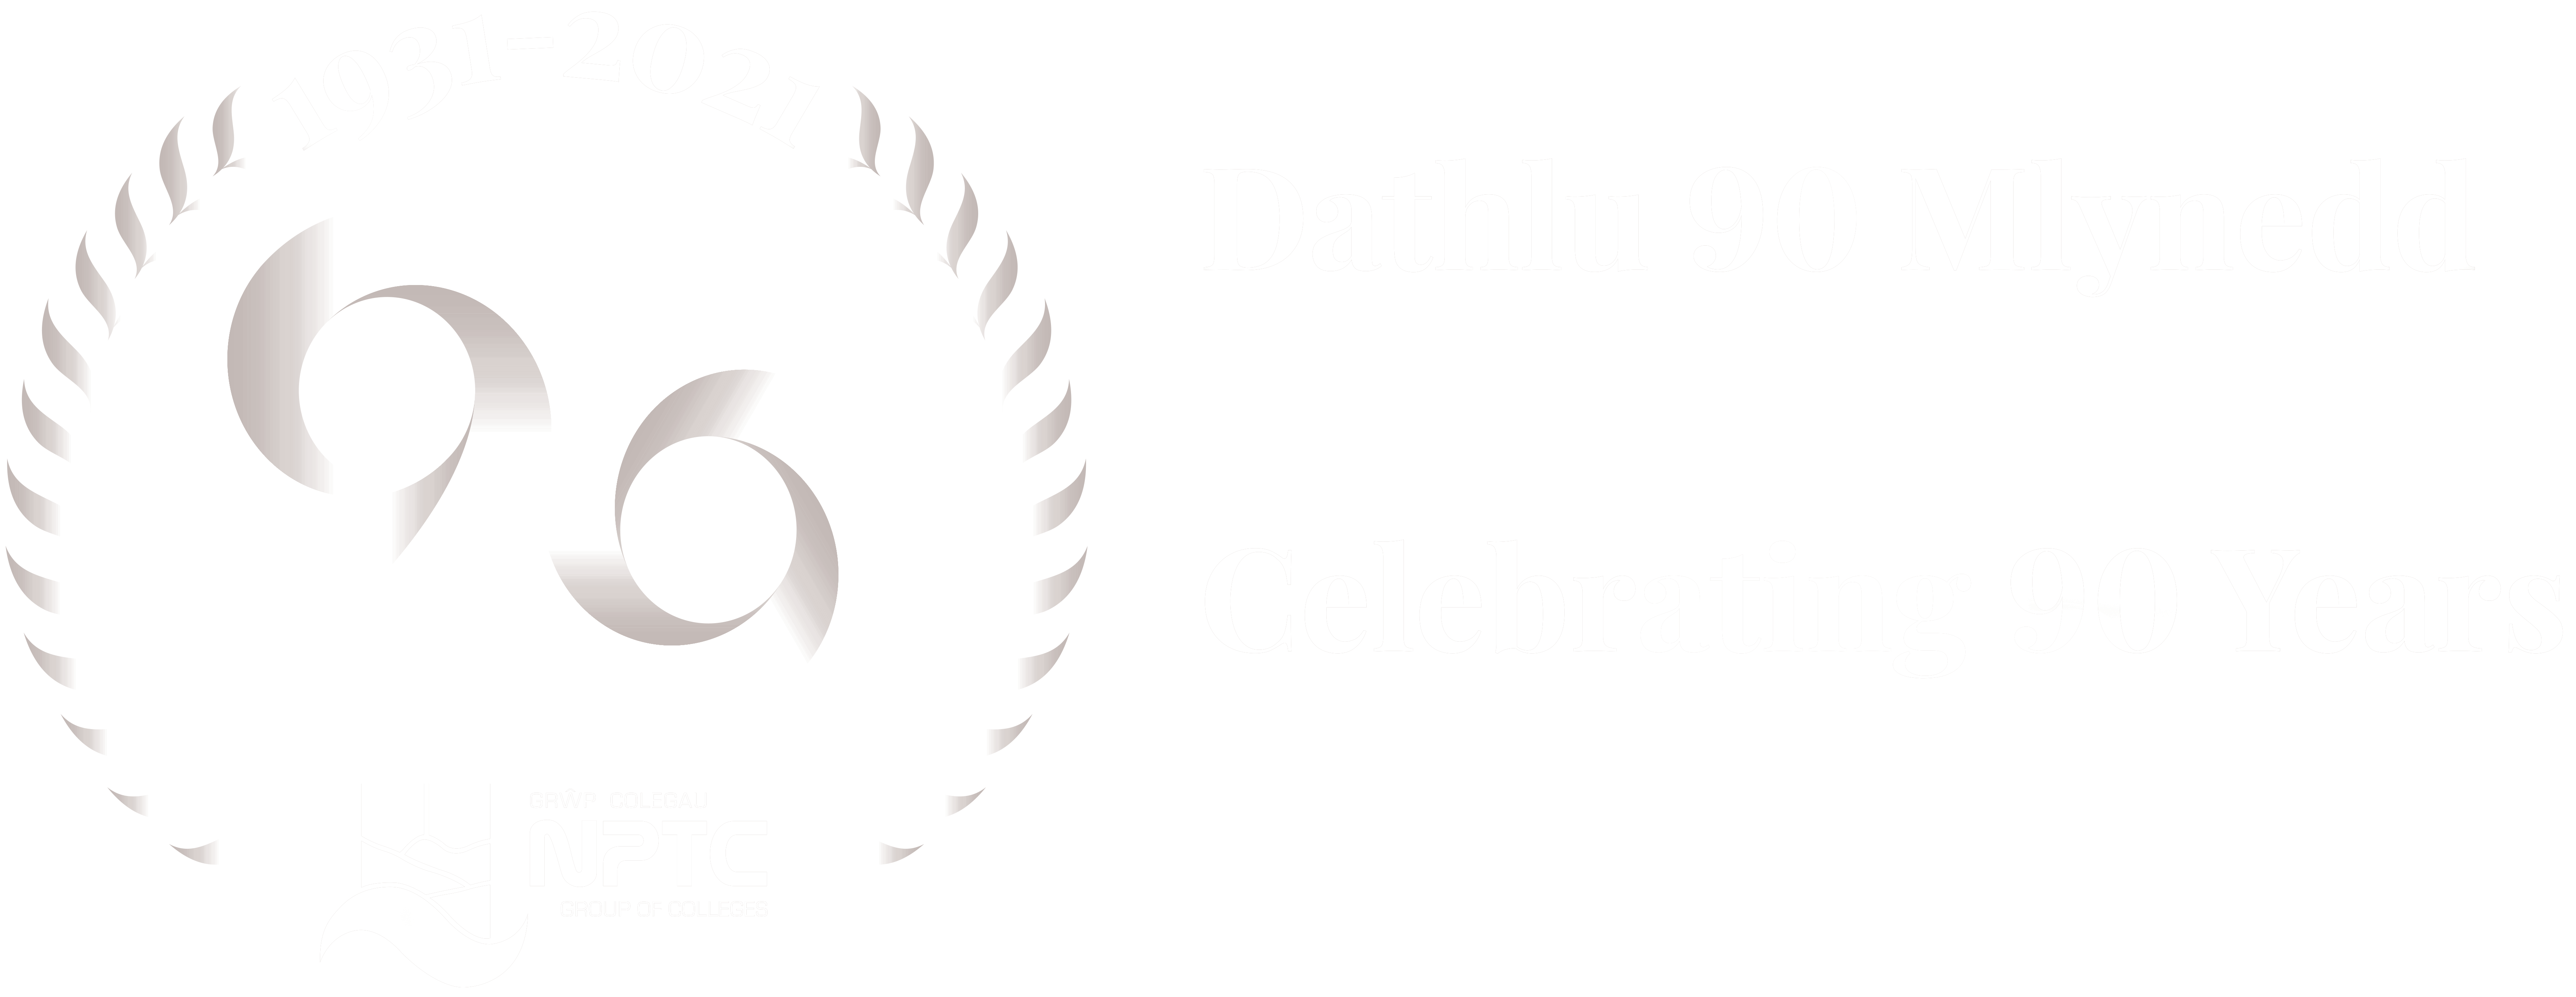 NPTC Group of Colleges - logo